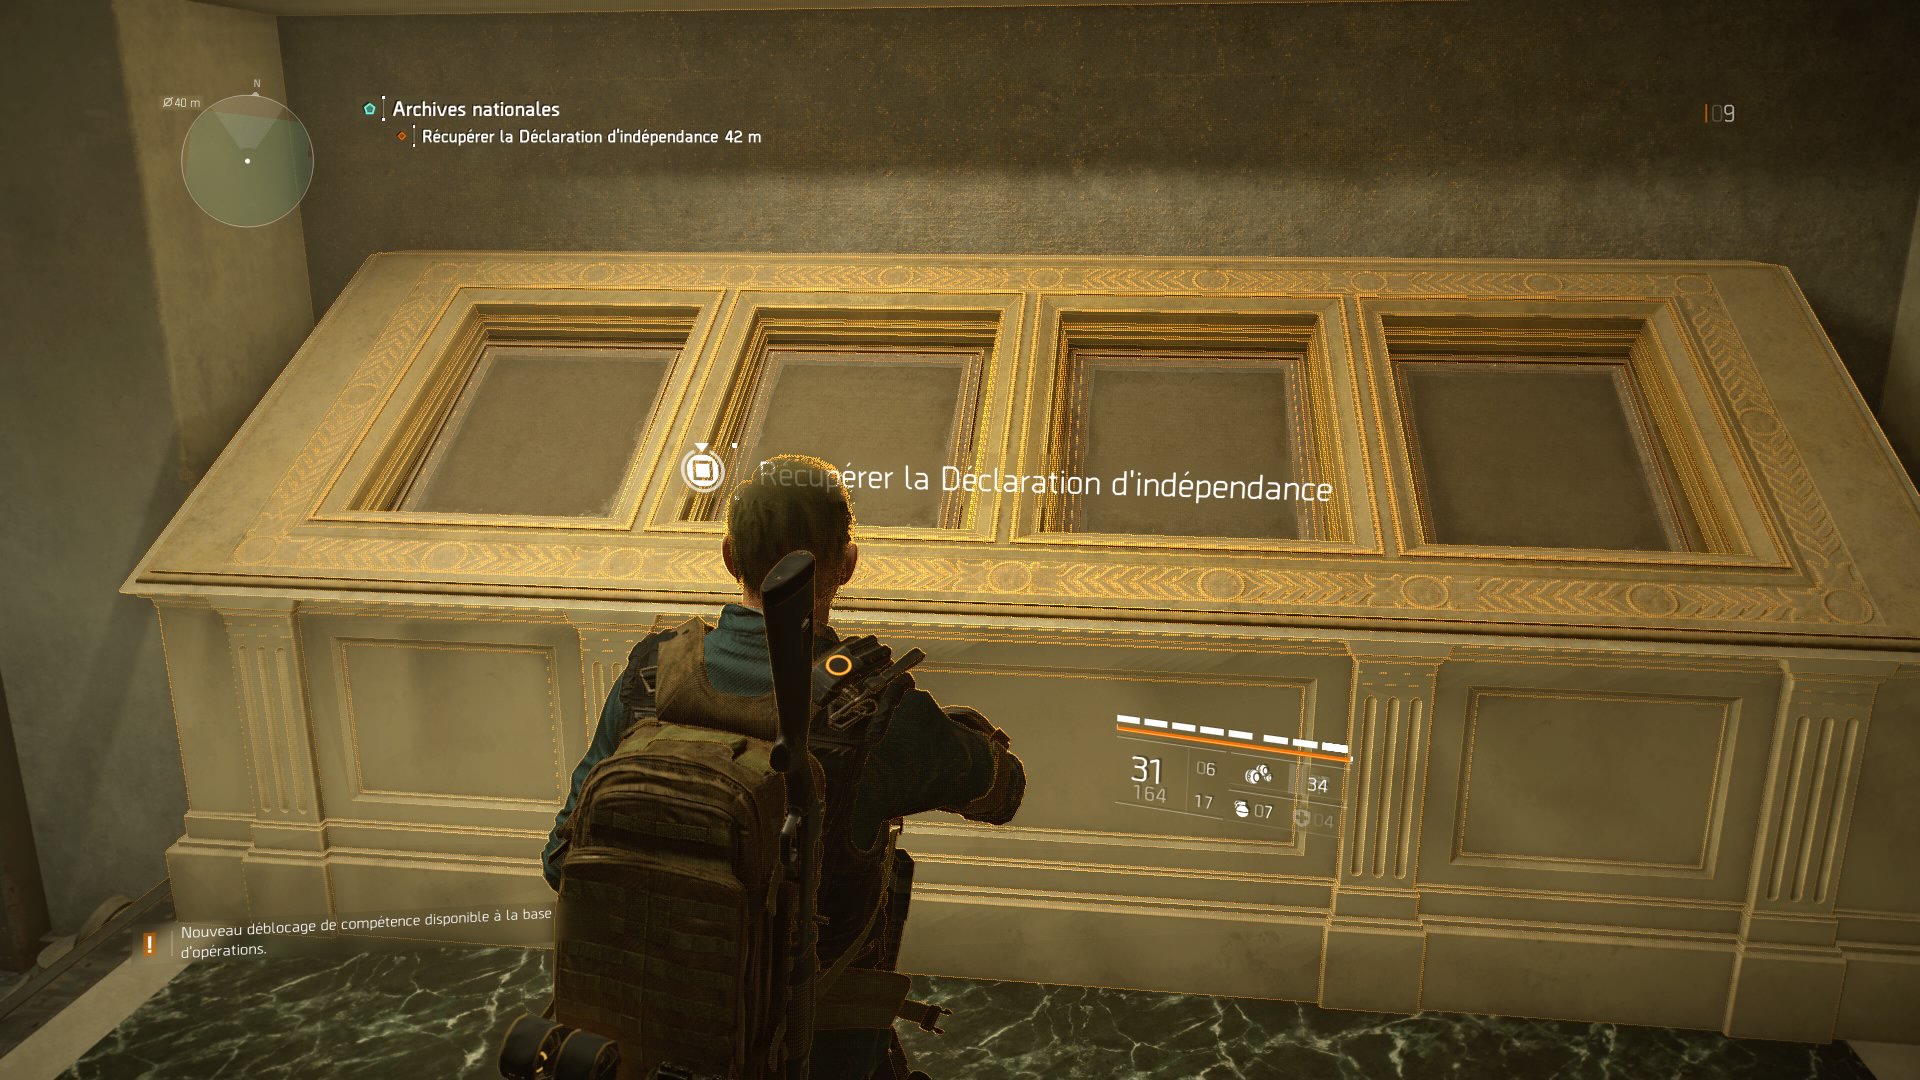 The division 2 archives nationales